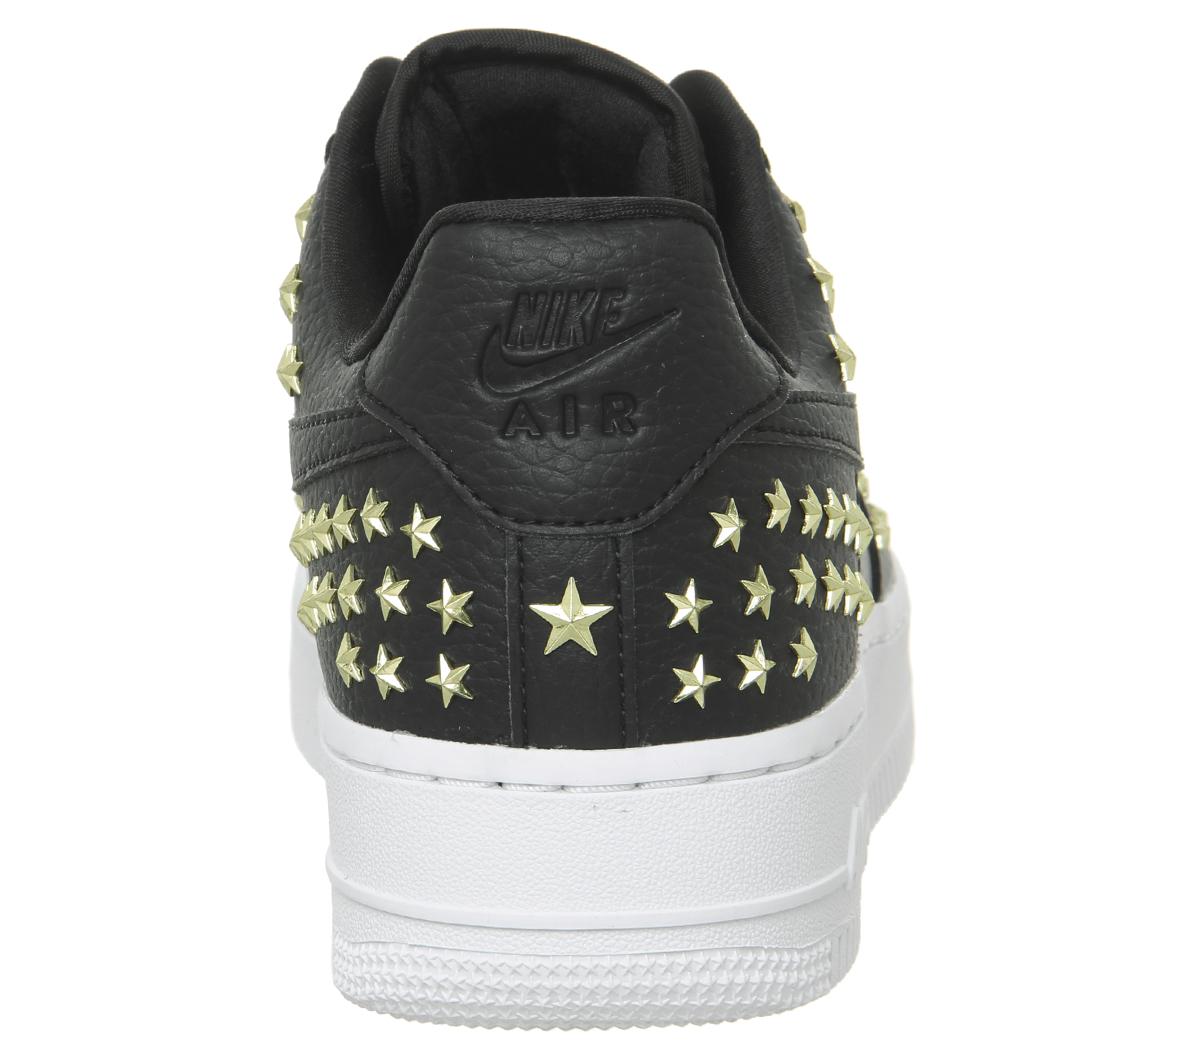 nike air force 1 7 trainers oil grey white star stud